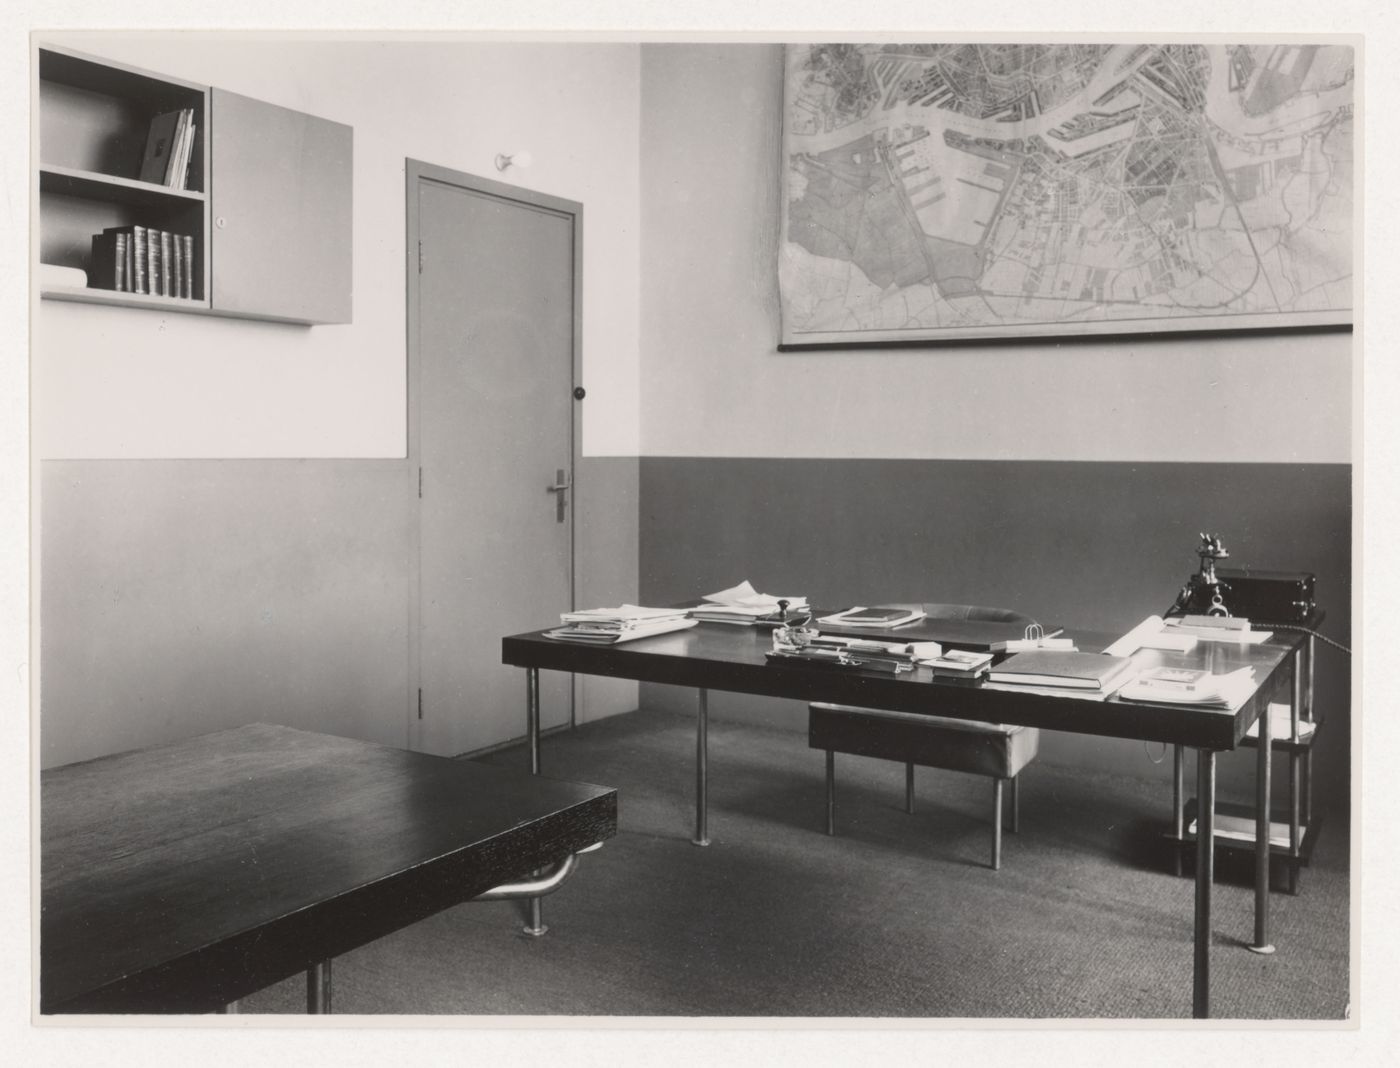 Interior view of M.J.I de Jonge van Ellemeet's office in Rotterdam City Hall showing the tables and a chair designed by J.J.P. Oud, Rotterdam, Netherlands